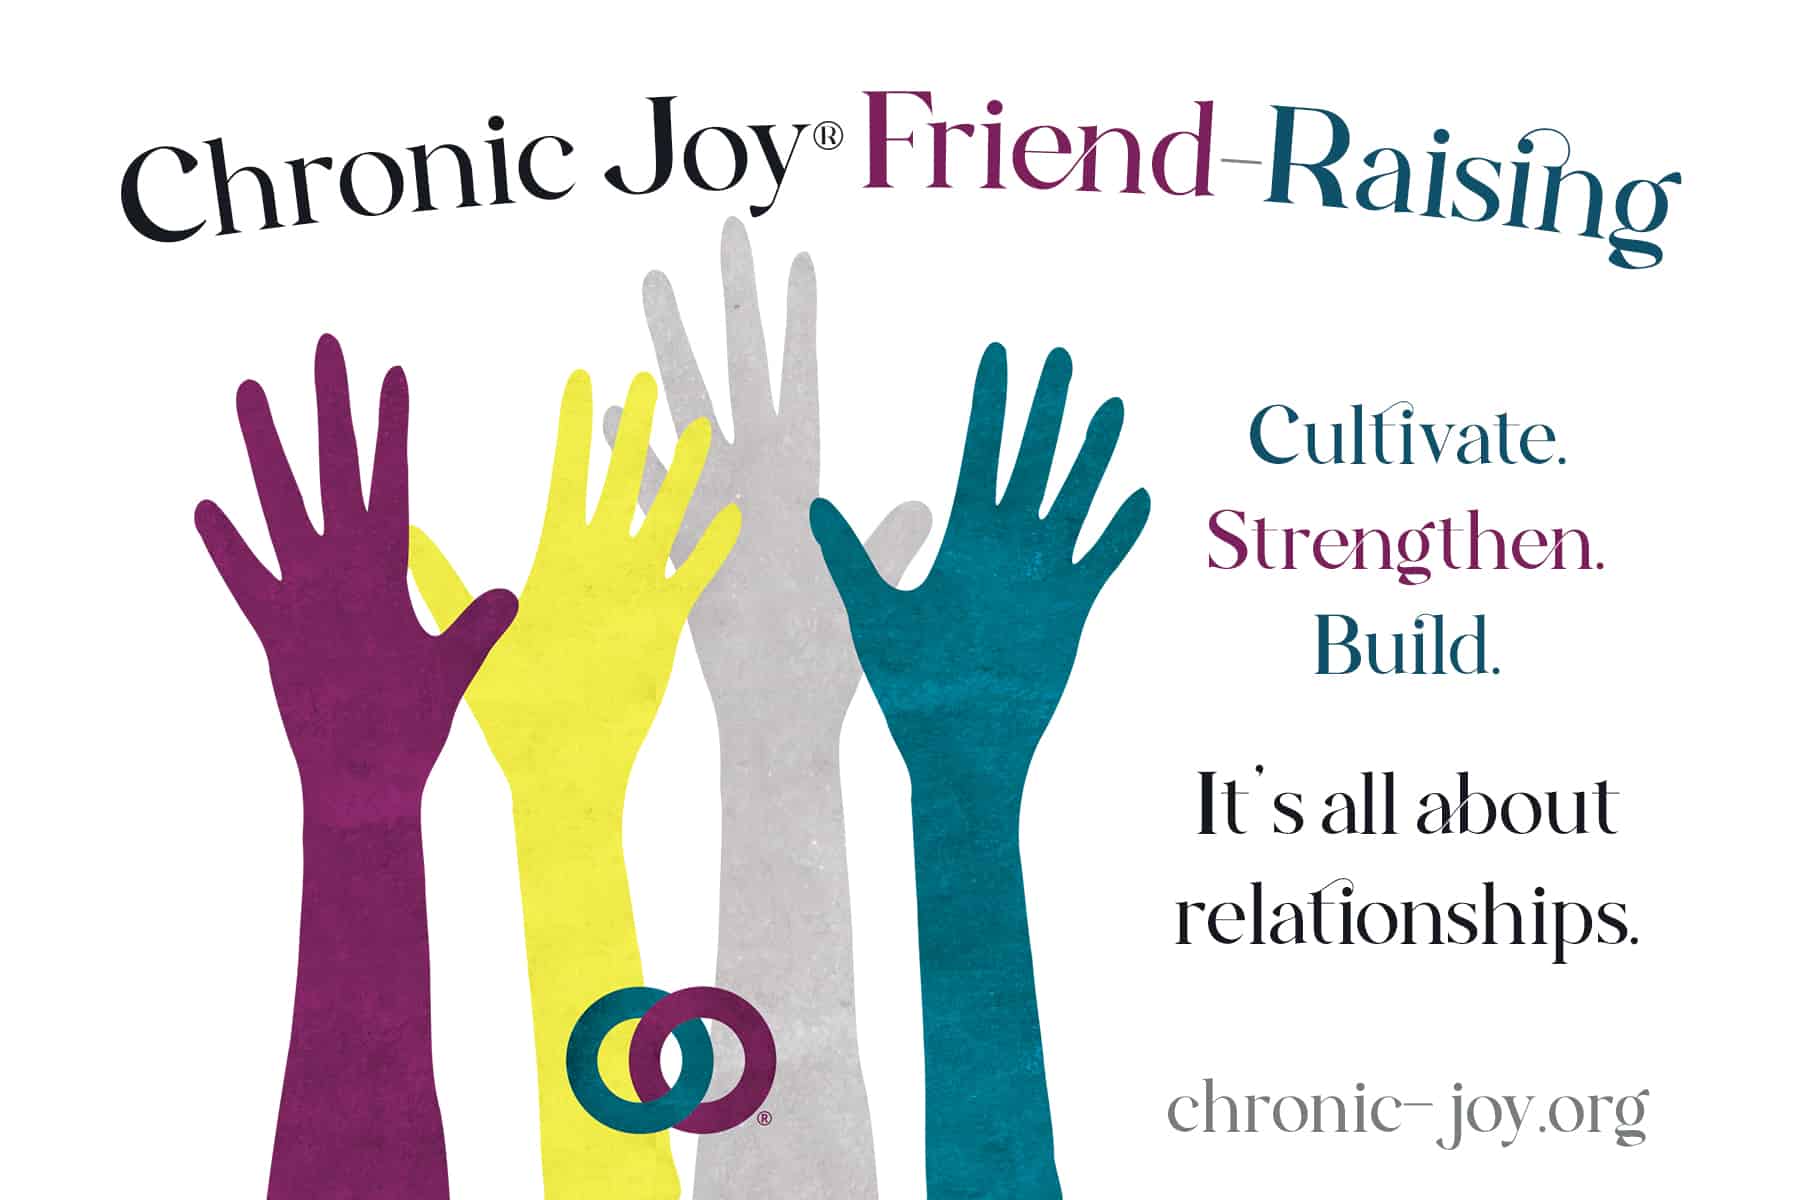 Chronic Joy® Friend-Raising • Cultivate. Strengthen. Build. It’s all about relationships.